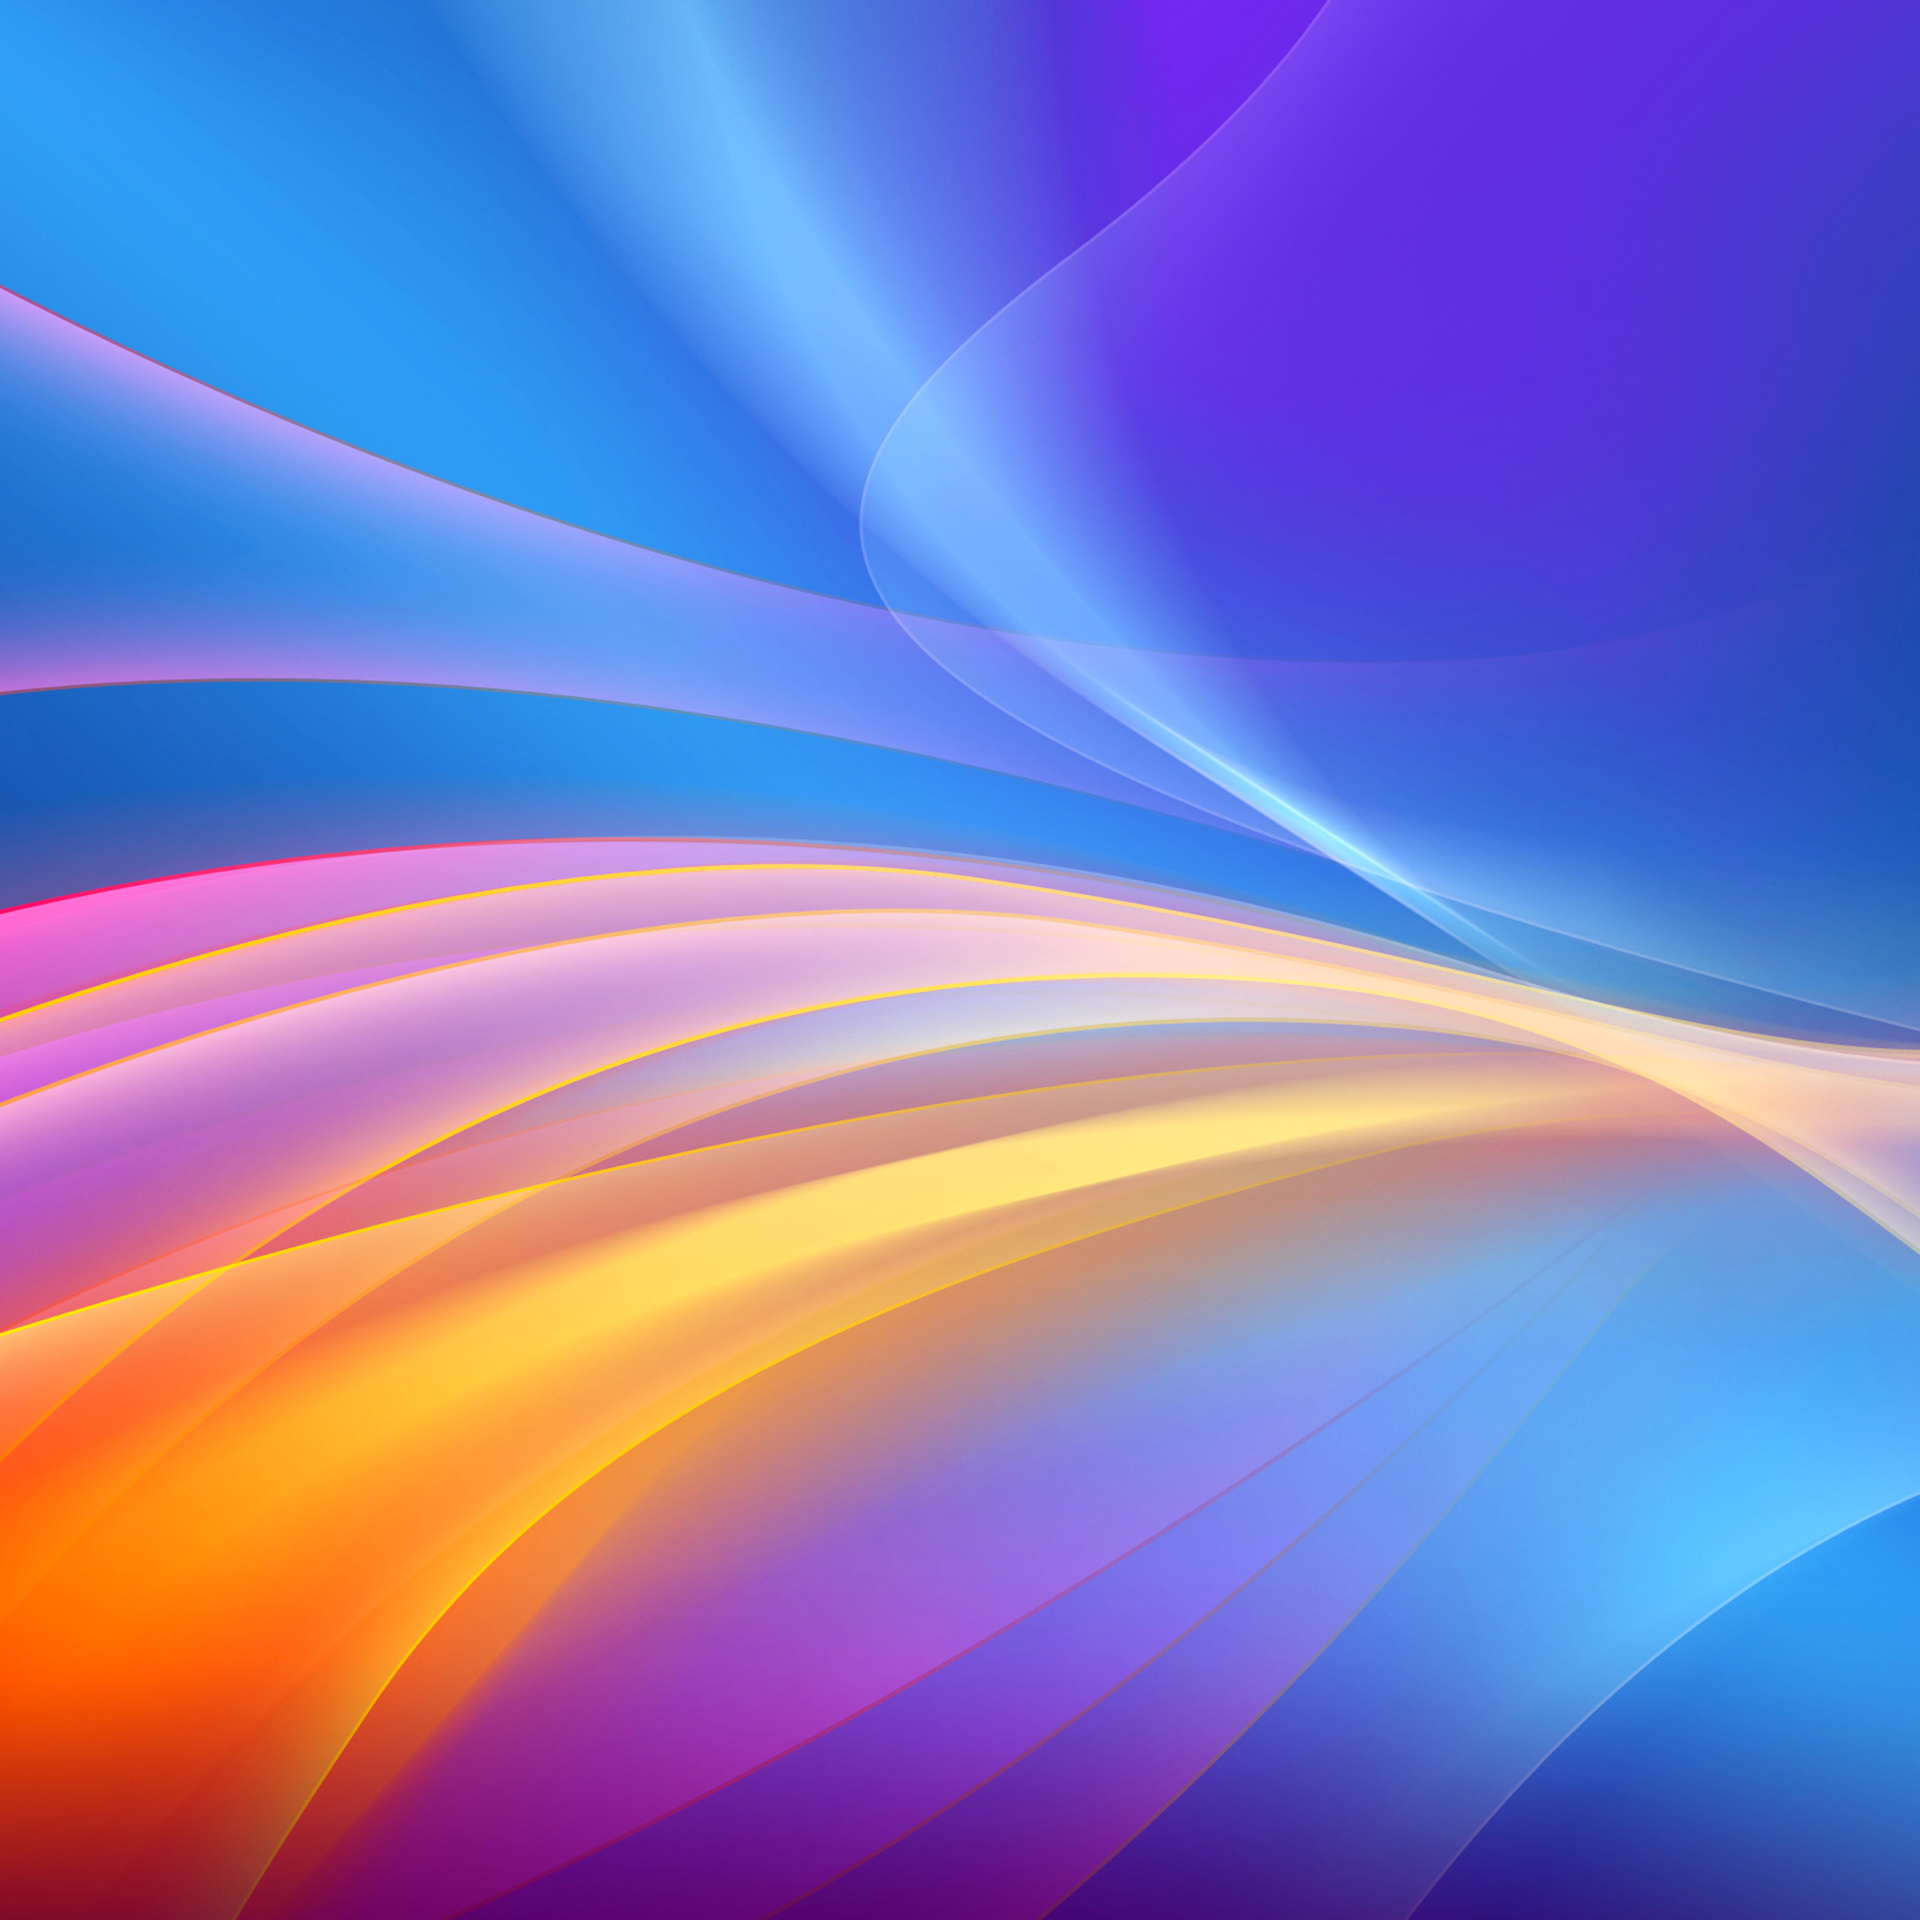 huawei stock wallpaper,blue,purple,violet,colorfulness,sky